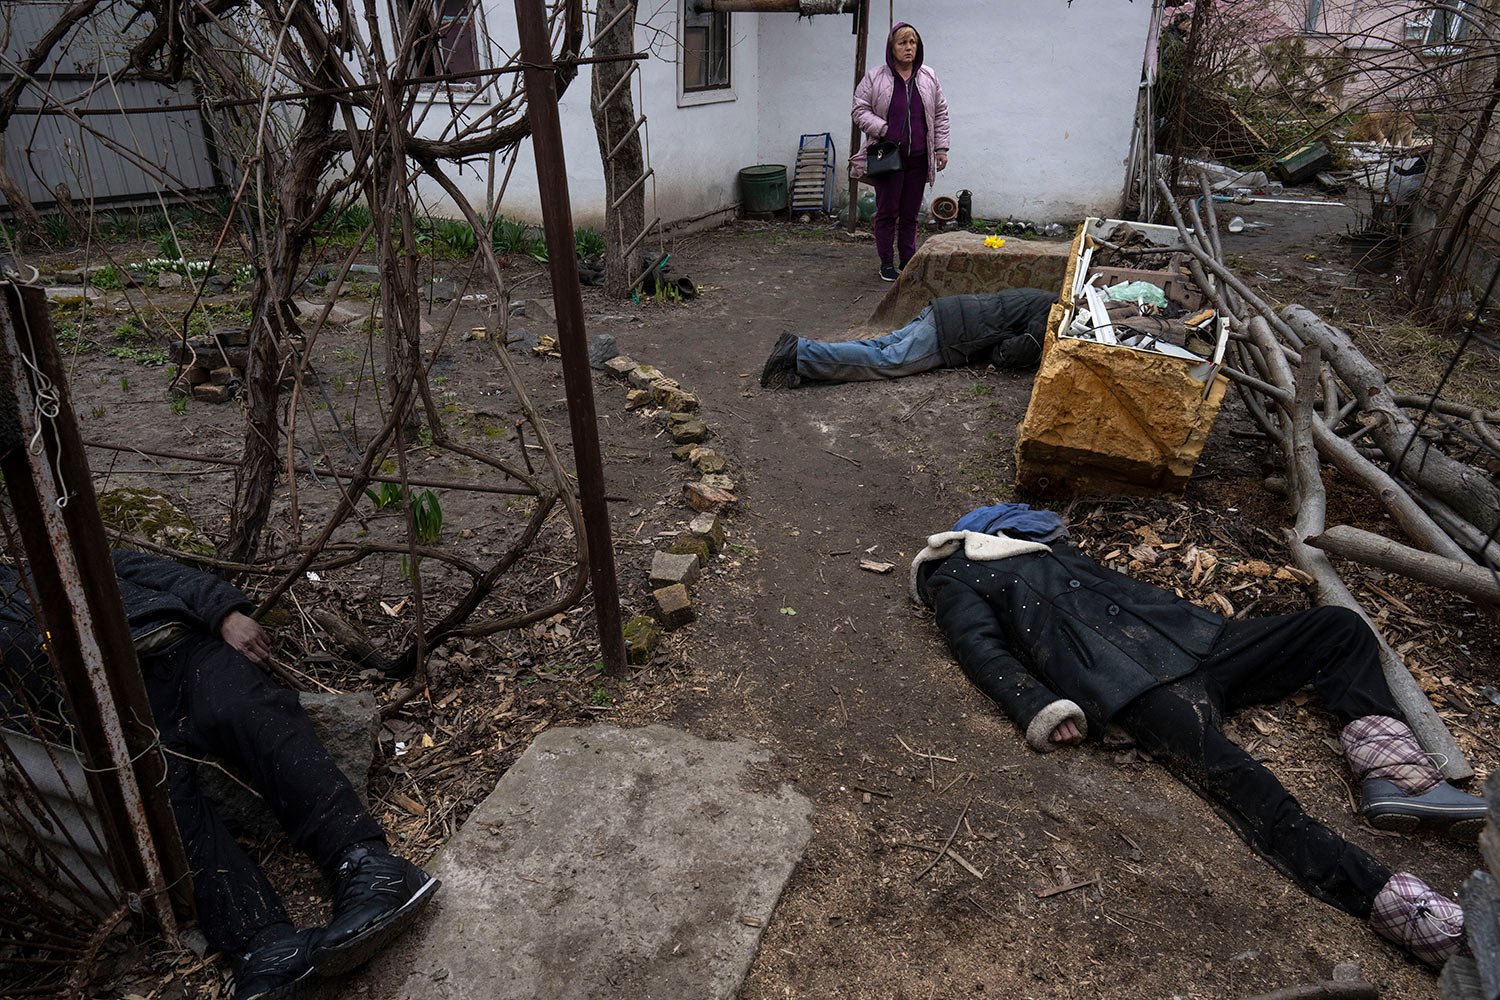  A woman stands next to three people killed in the courtyard of a house in Bucha, on the outskirts of Kyiv, Ukraine, Tuesday, April 5, 2022. (AP Photo/Rodrigo Abd) 